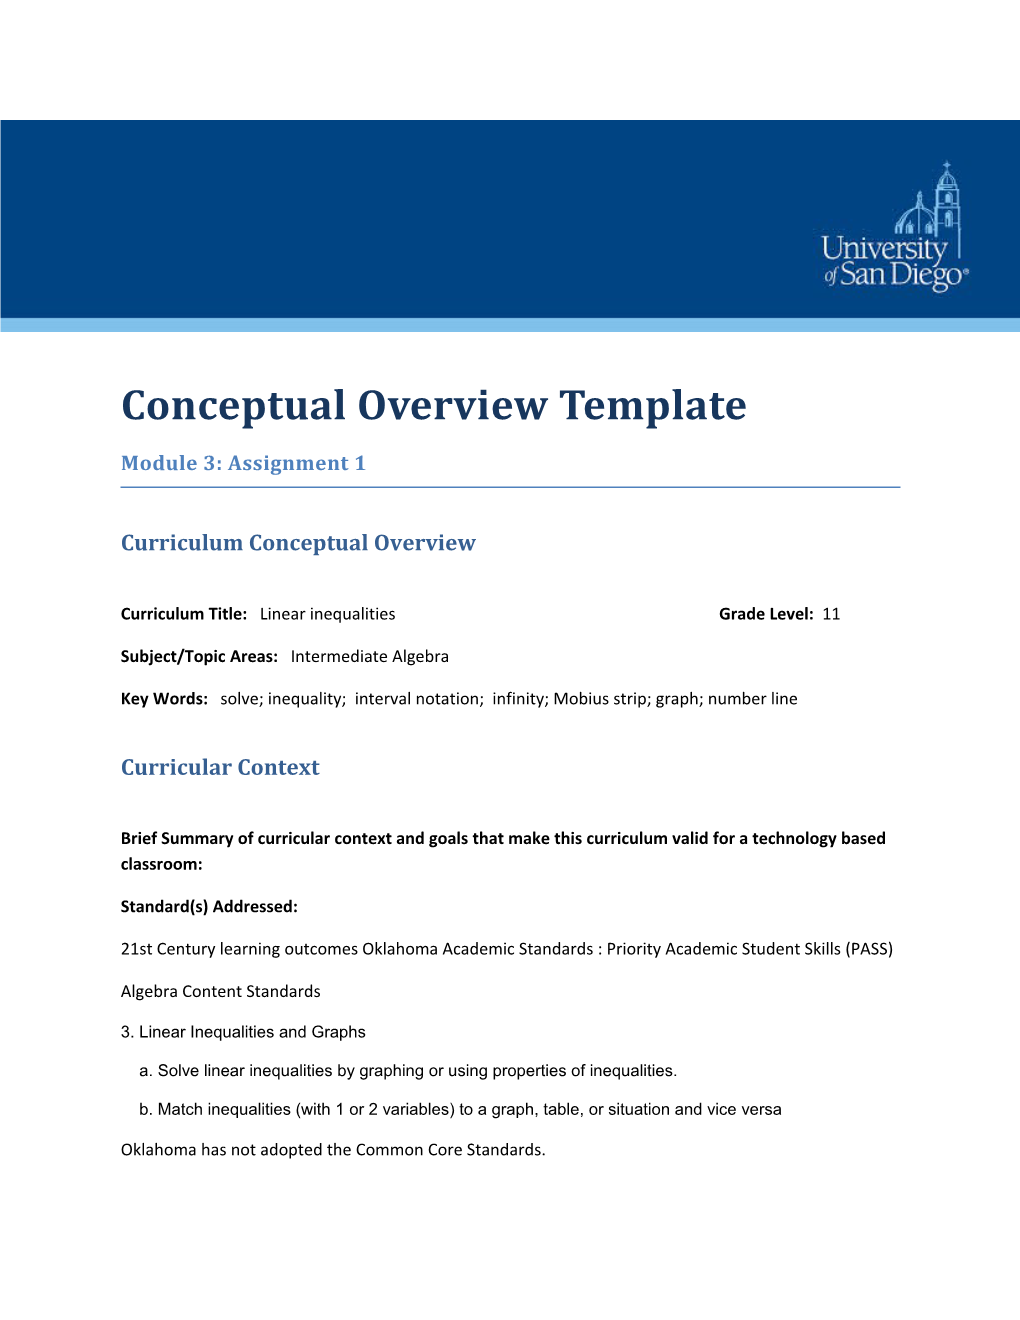 Conceptual Overview Template Module 3: Assignment 1